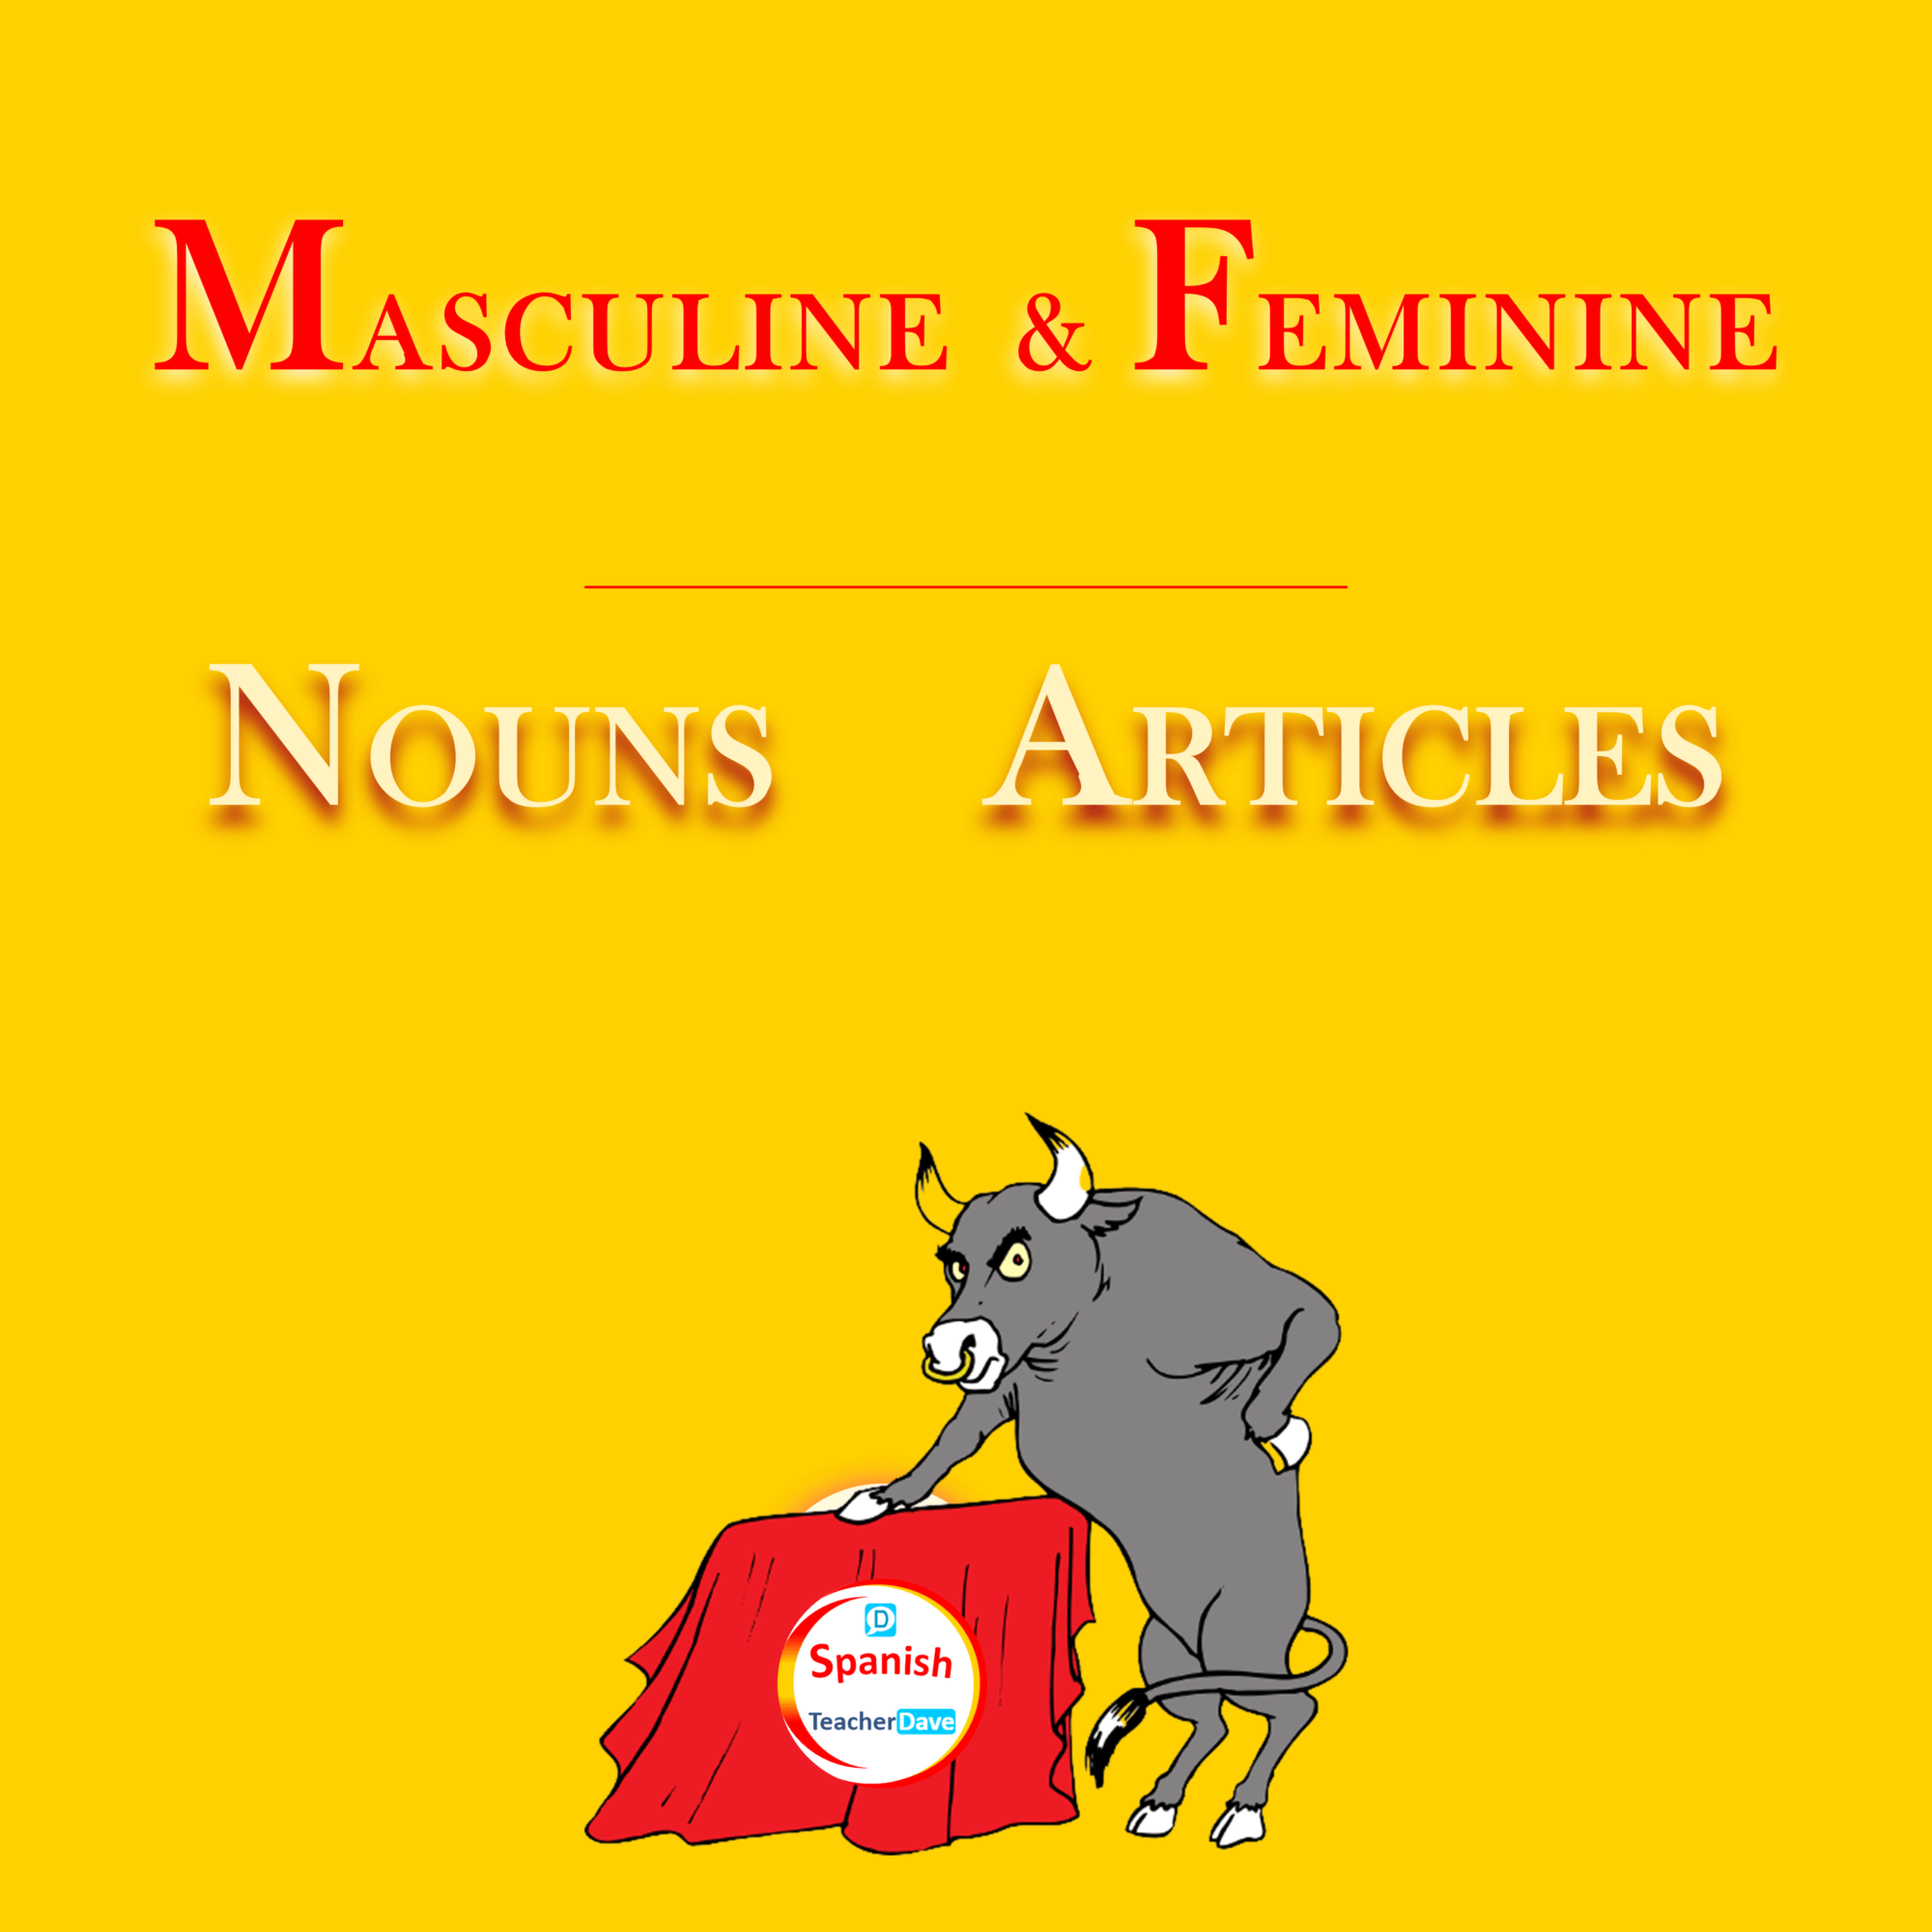 Spanish Masculine and Feminine Nouns and Articles